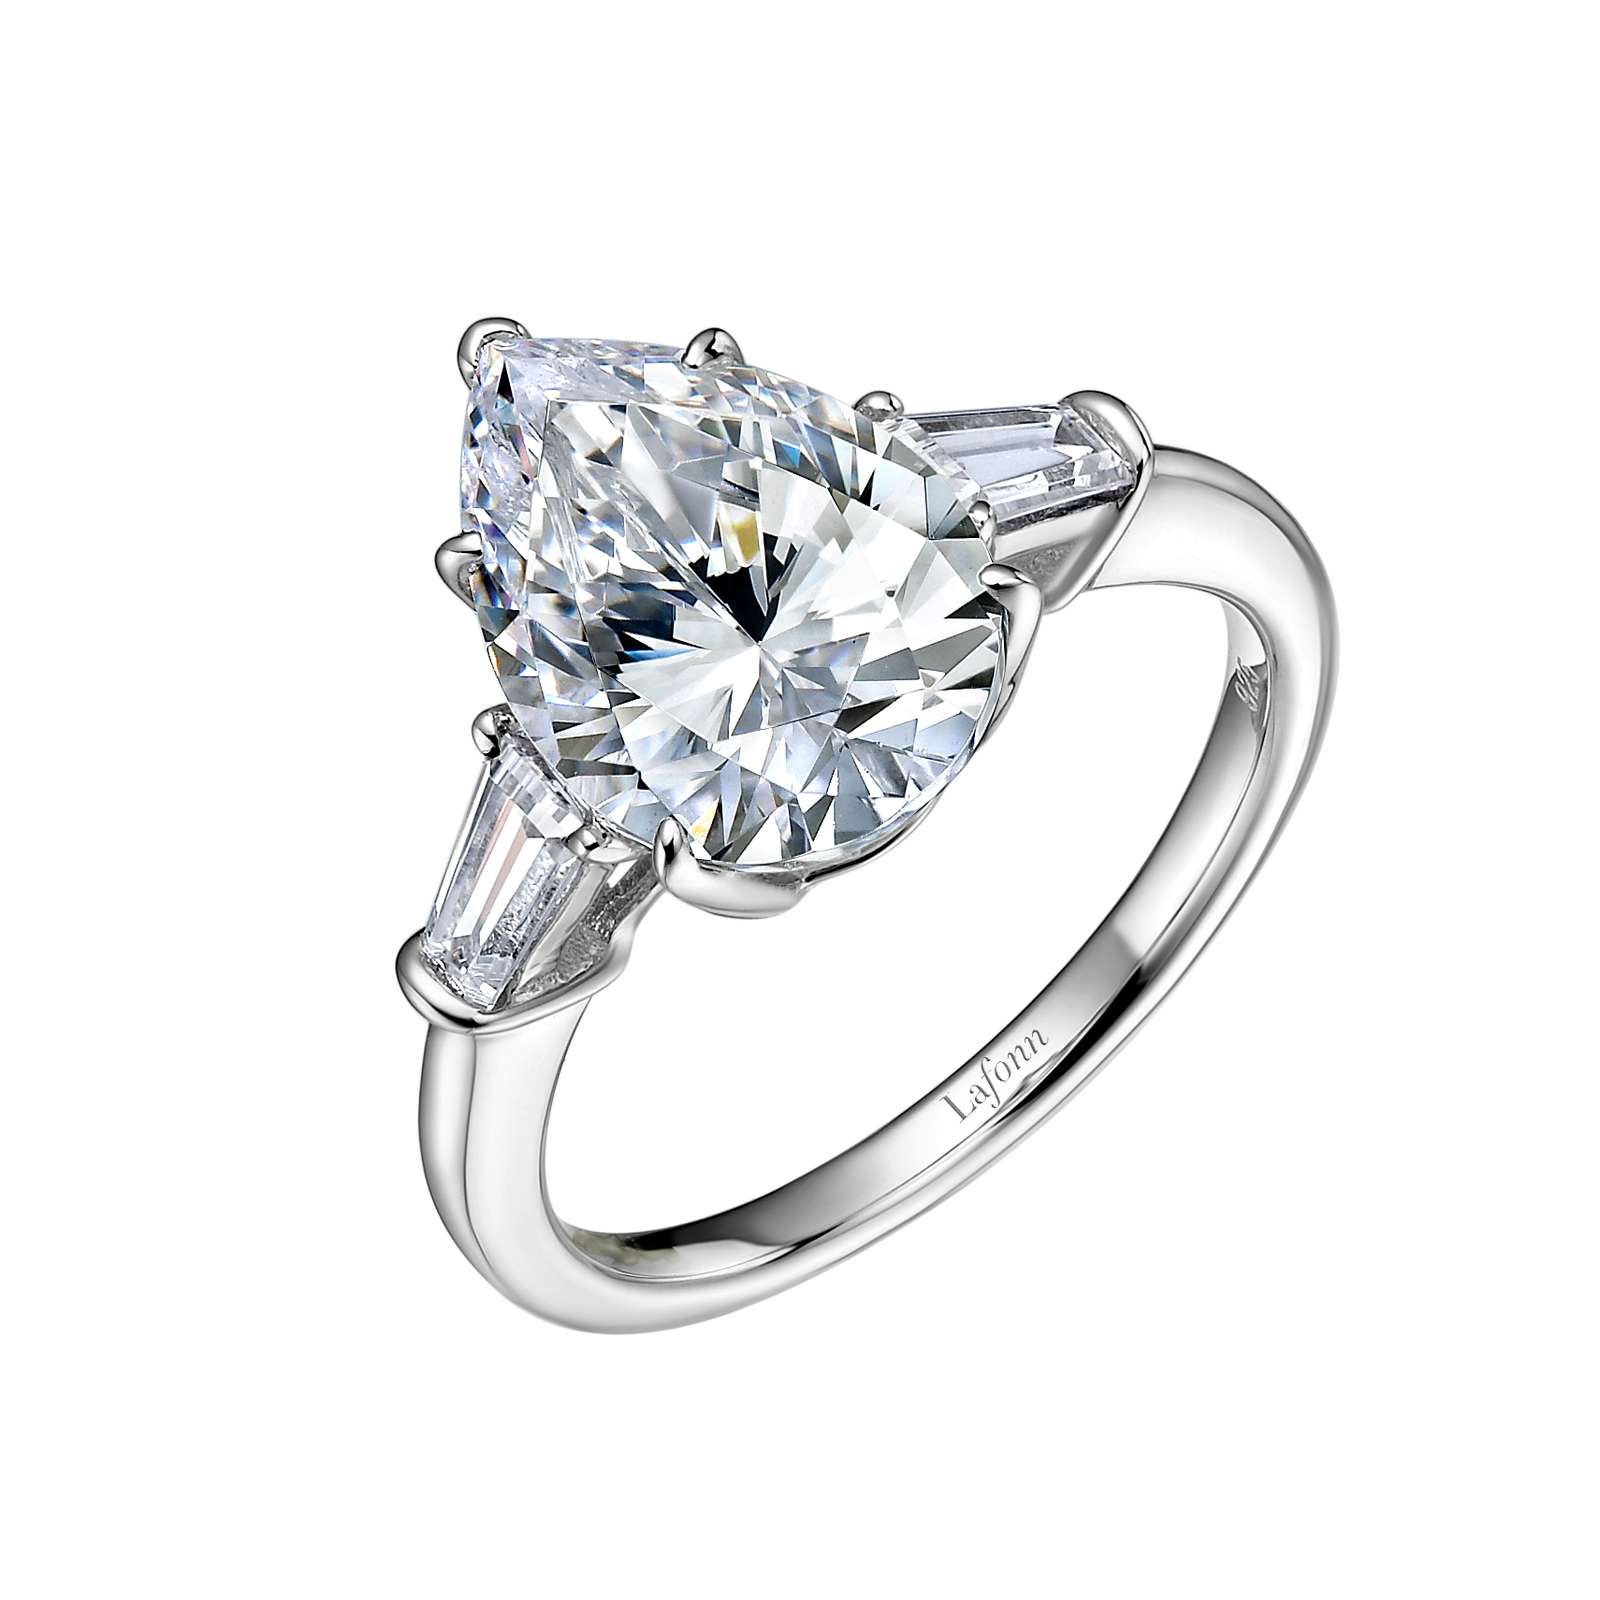 Classic Three-Stone Engagement Ring Griner Jewelry Co. Moultrie, GA